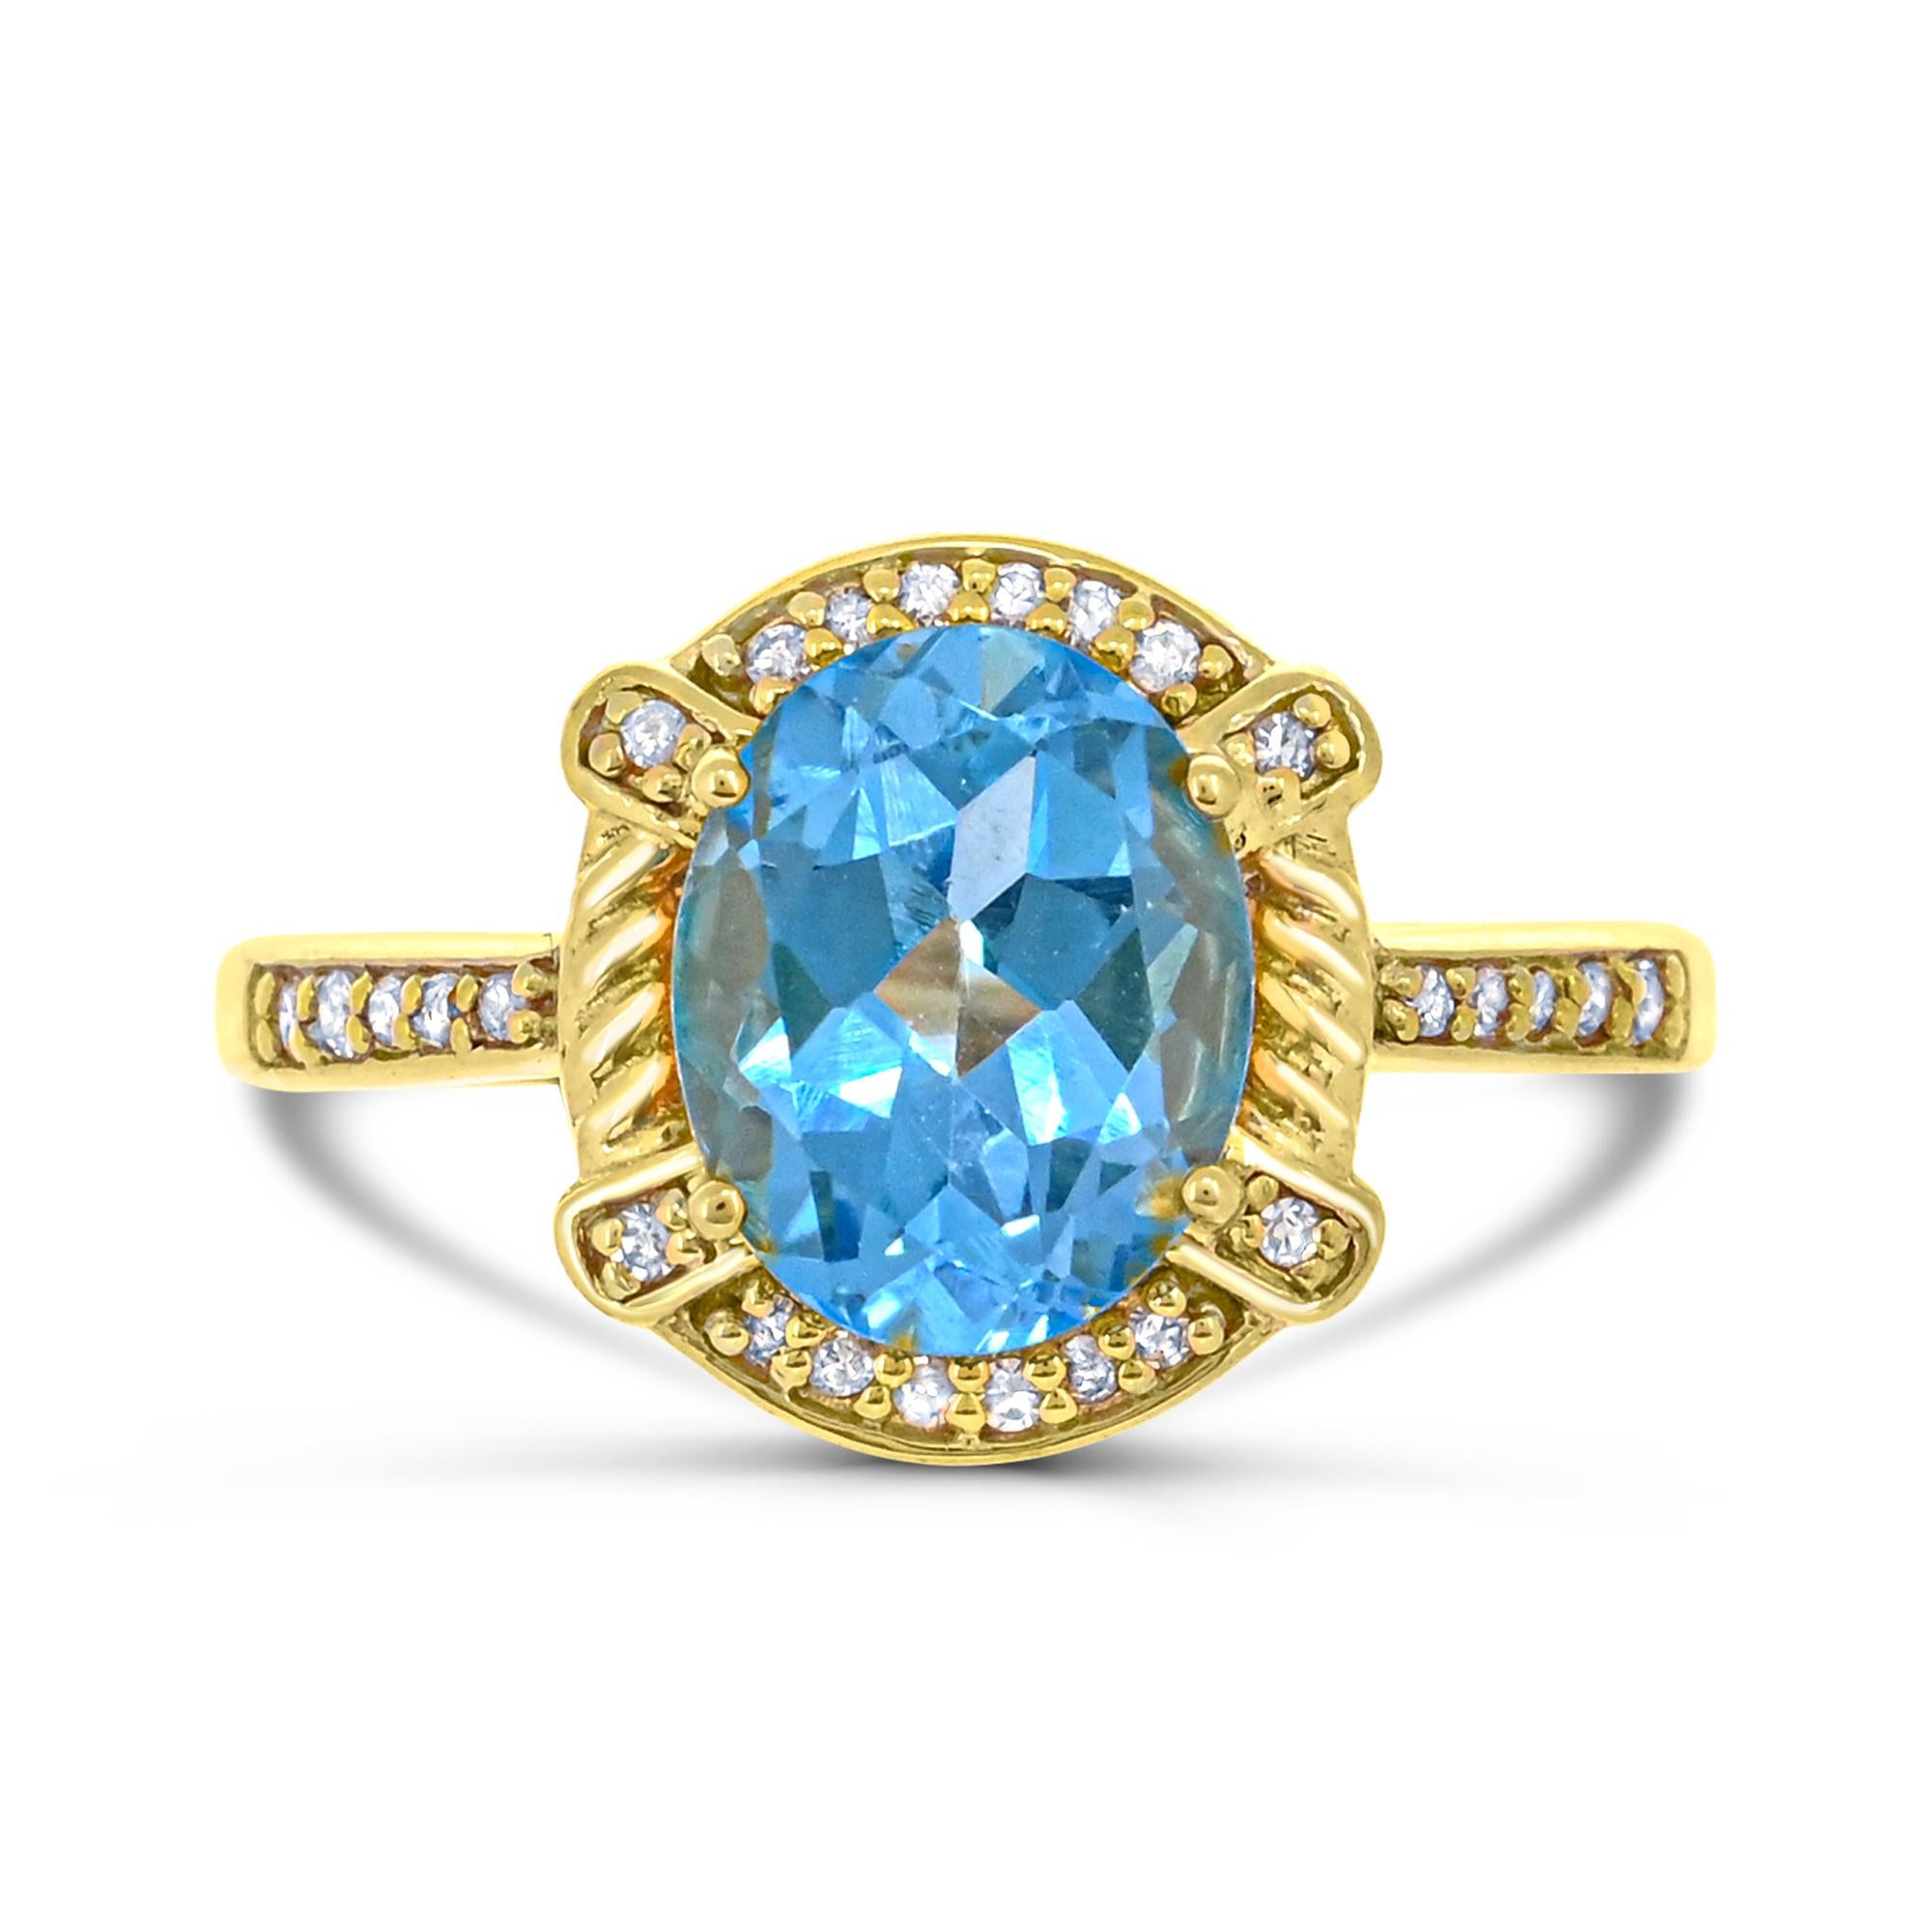 Indulge in the elegance of our Oval Swiss Blue Topaz with Round White Diamond Accented 18K Yellow Gold over Sterling Silver Ring. Crafted with meticulous attention to detail, this ring boasts a stunning combination of oval Swiss blue topaz accented